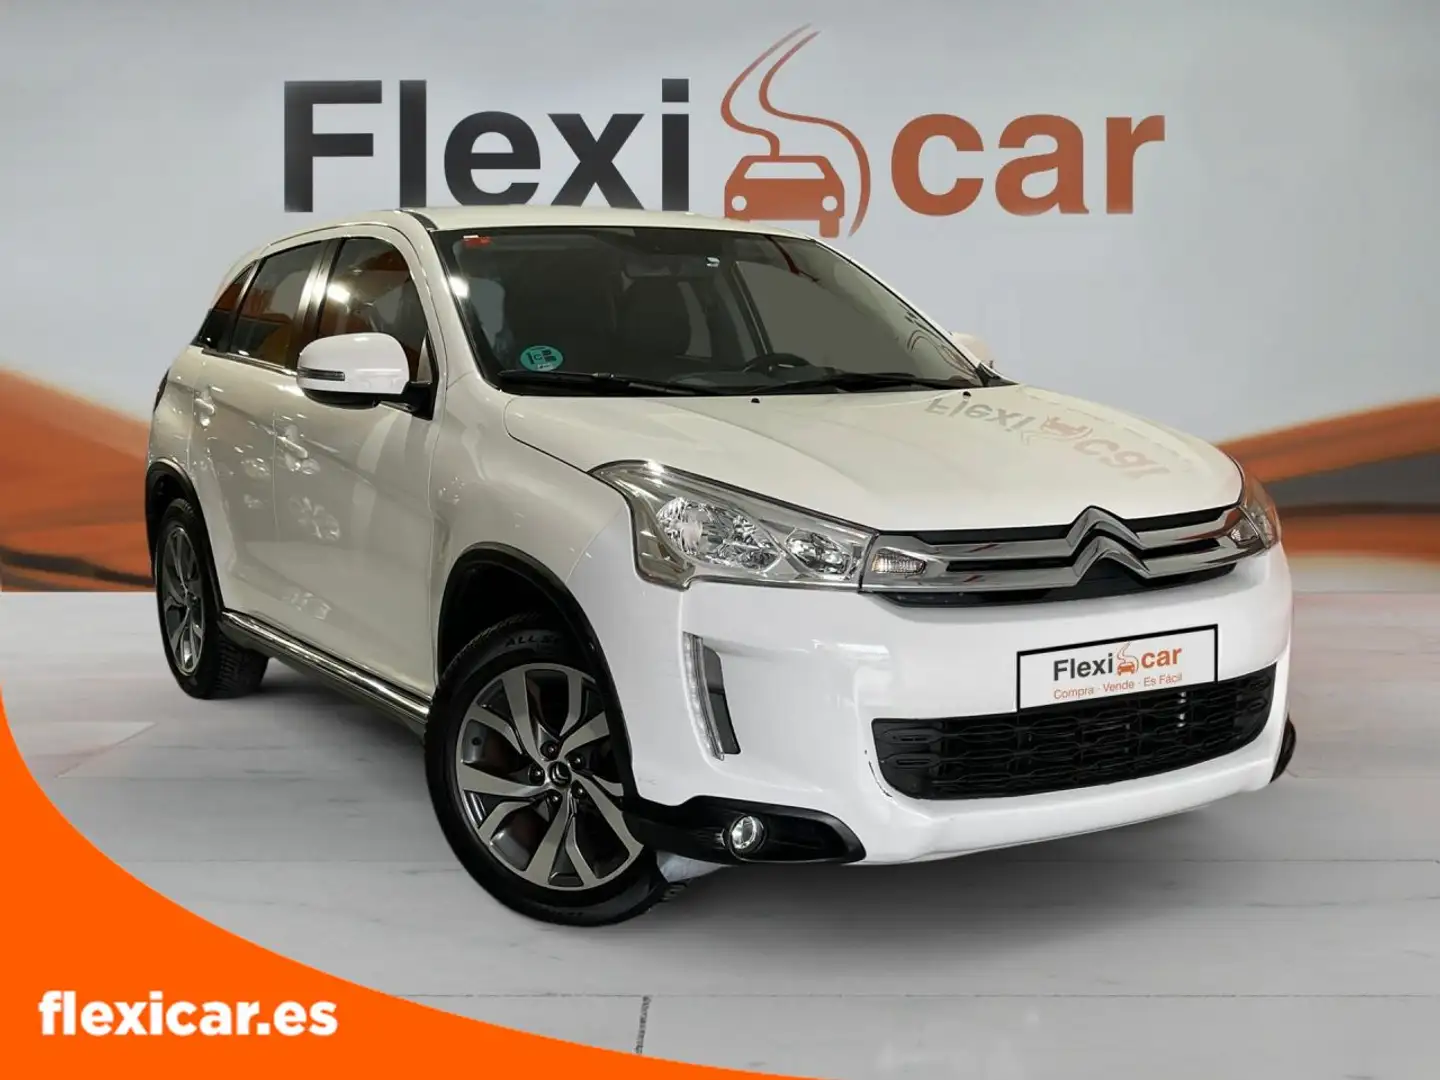 Citroen C4 Aircross 1.6HDI S&S Attraction 2WD 115 Beyaz - 2